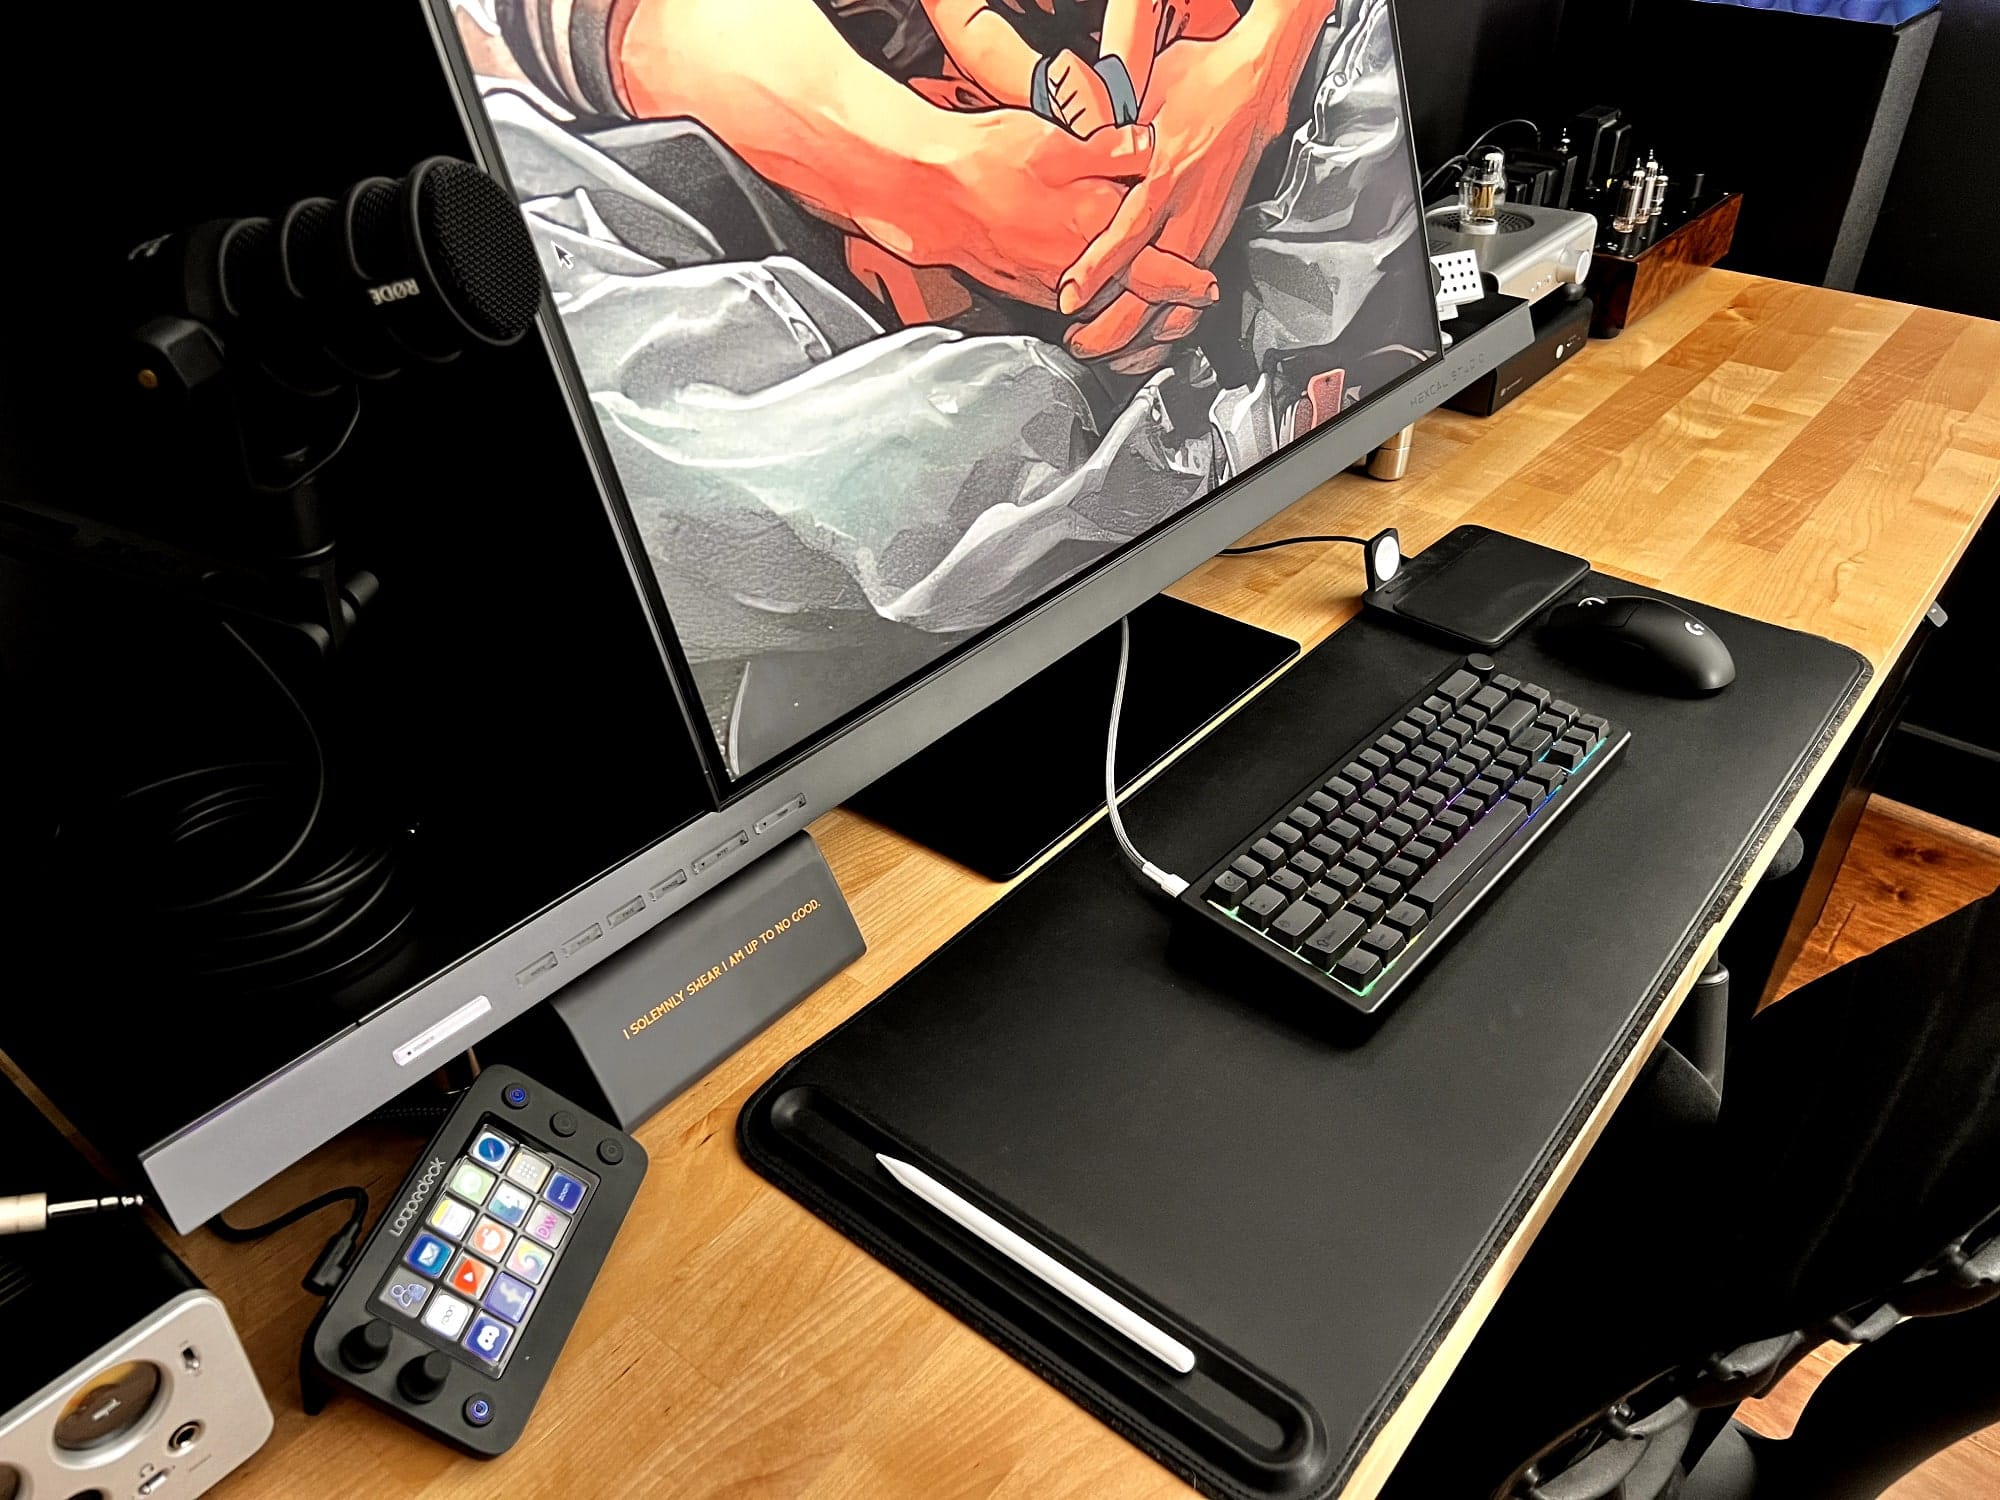 A close-up view of a tidy gaming desk setup, featuring a large Samsung Odyssey Ark 2 monitor with an anime display, a mechanical keyboard, a gaming mouse, a Stream Deck, and a RØDE microphone, all arranged neatly on a wooden surface